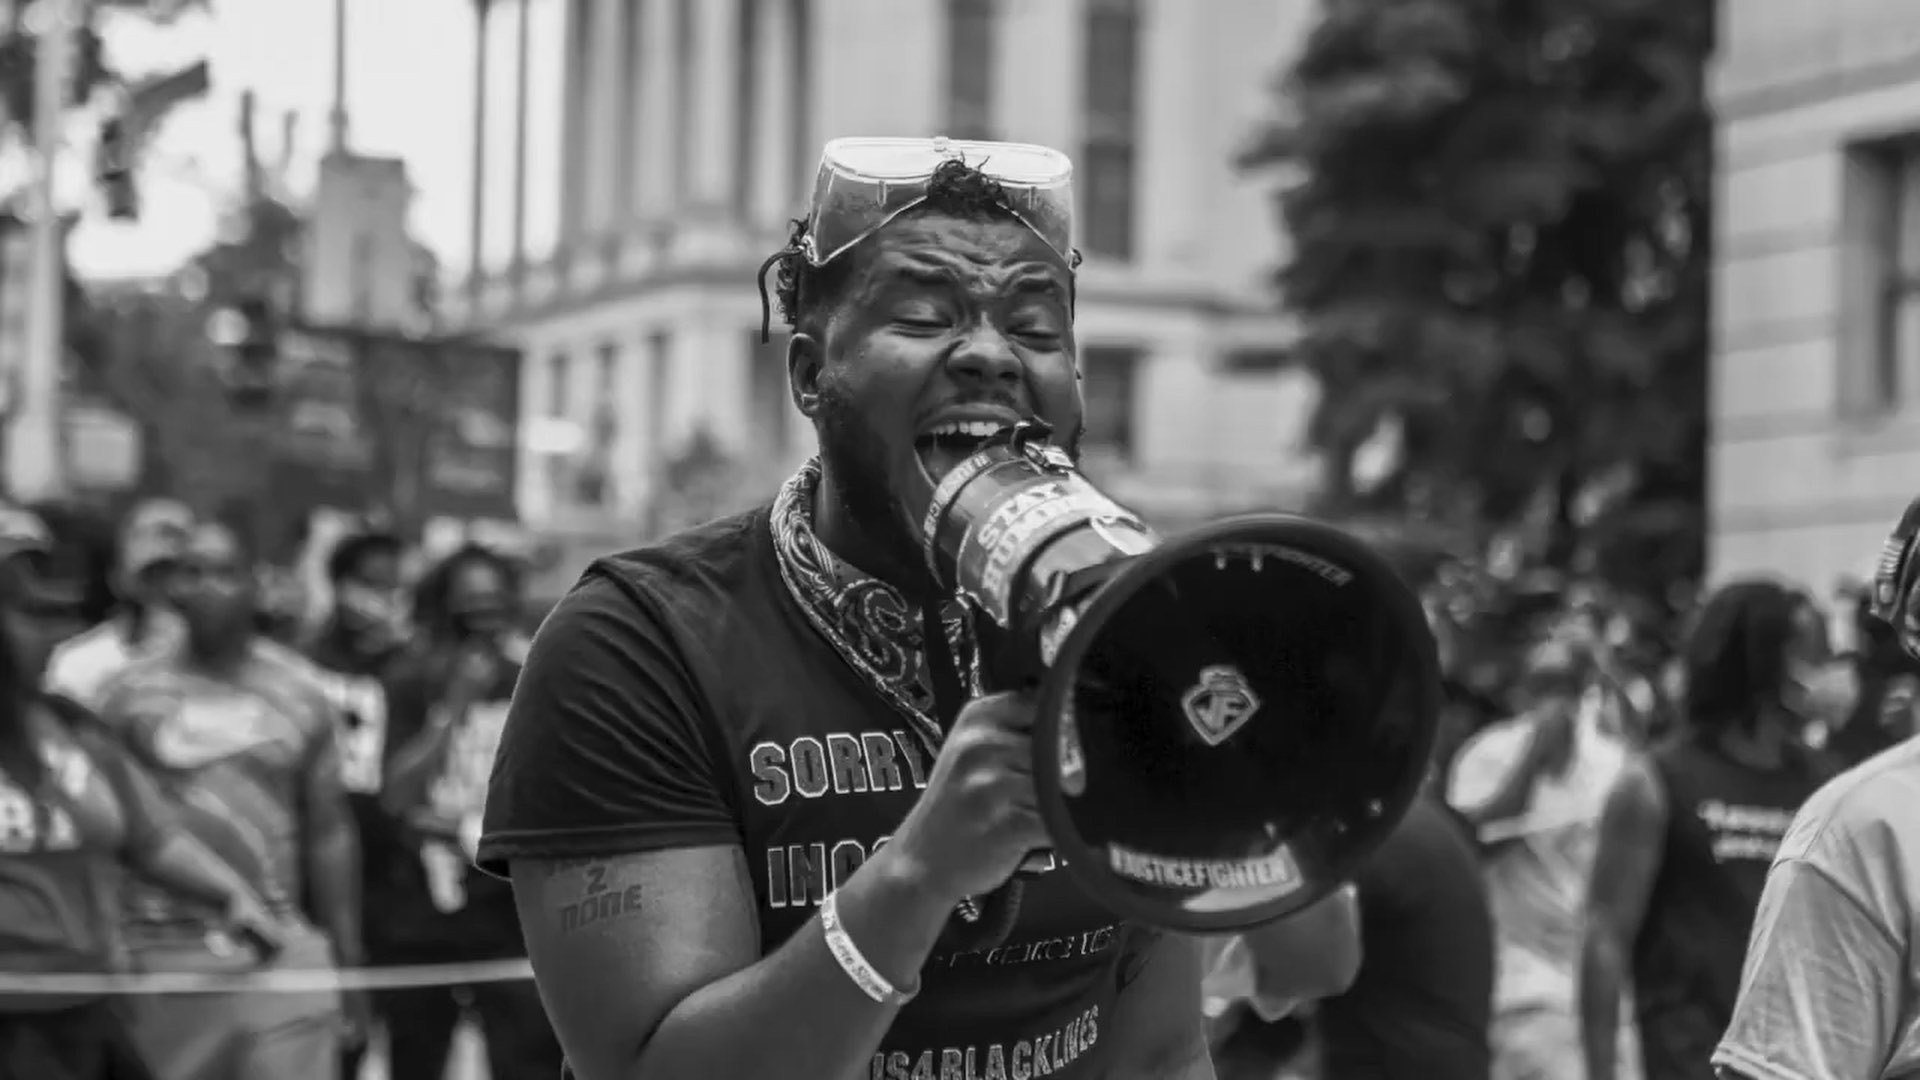 Black and white of man using a bullhorn